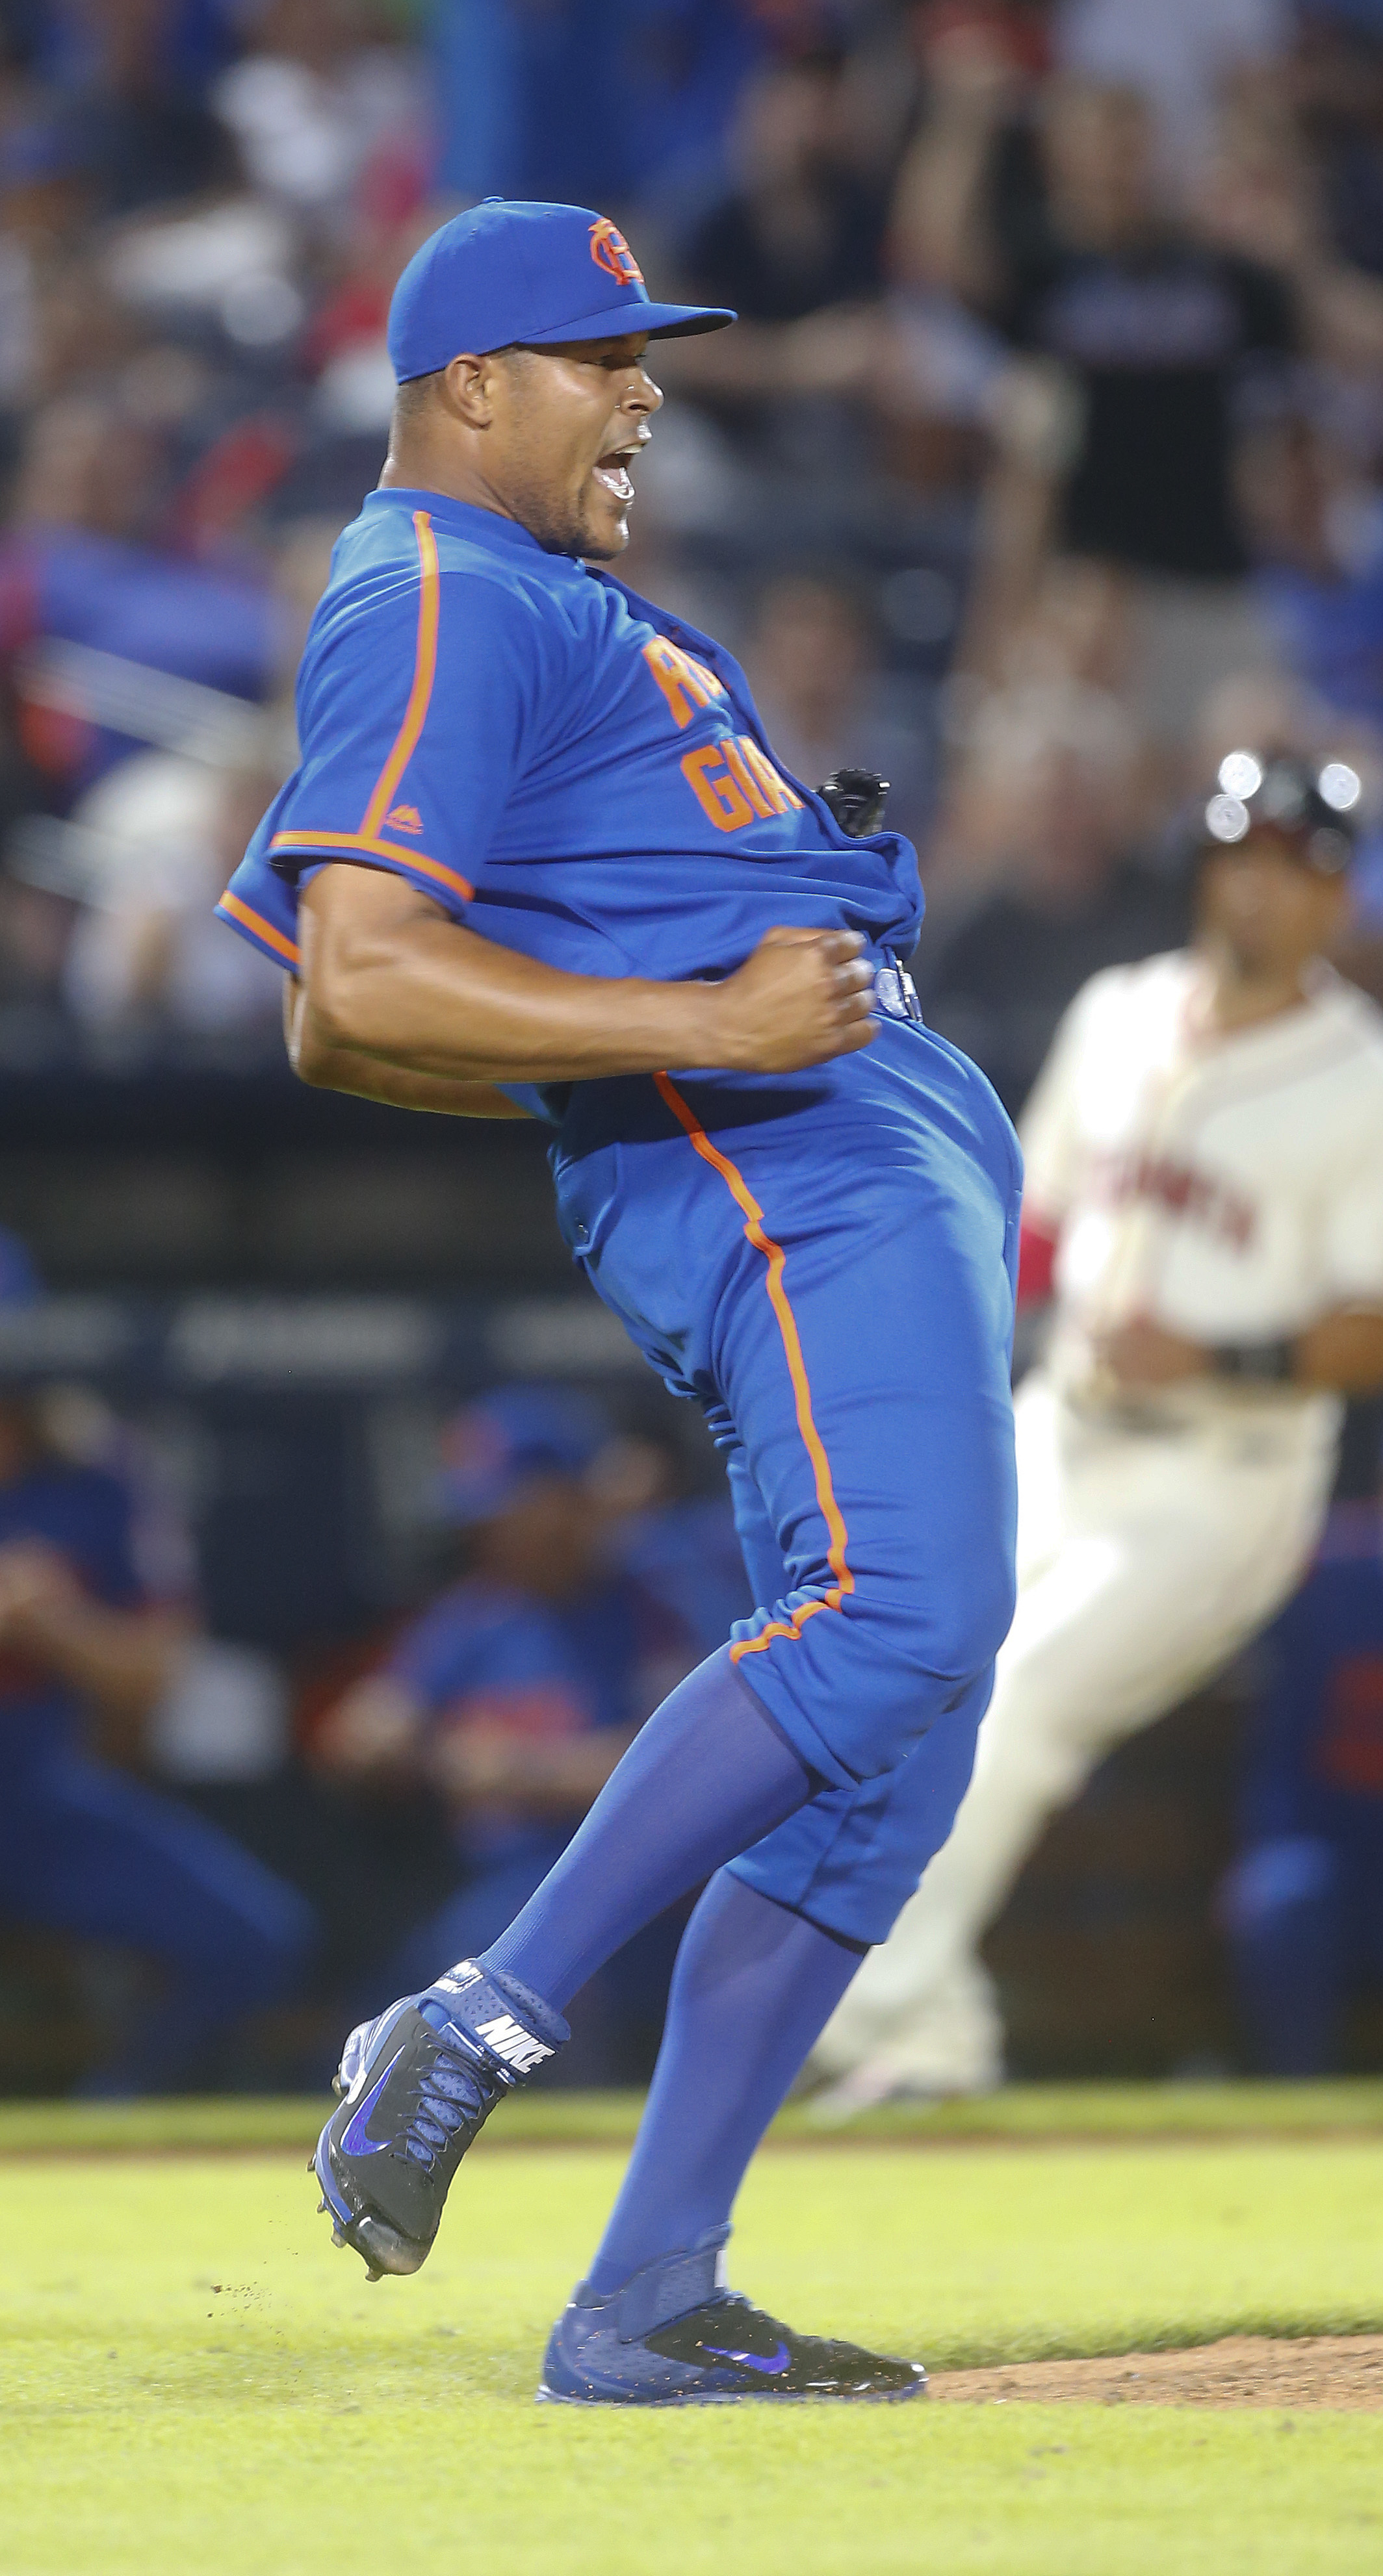 Jacob deGrom gives up 3 homers as Braves pull even with Mets